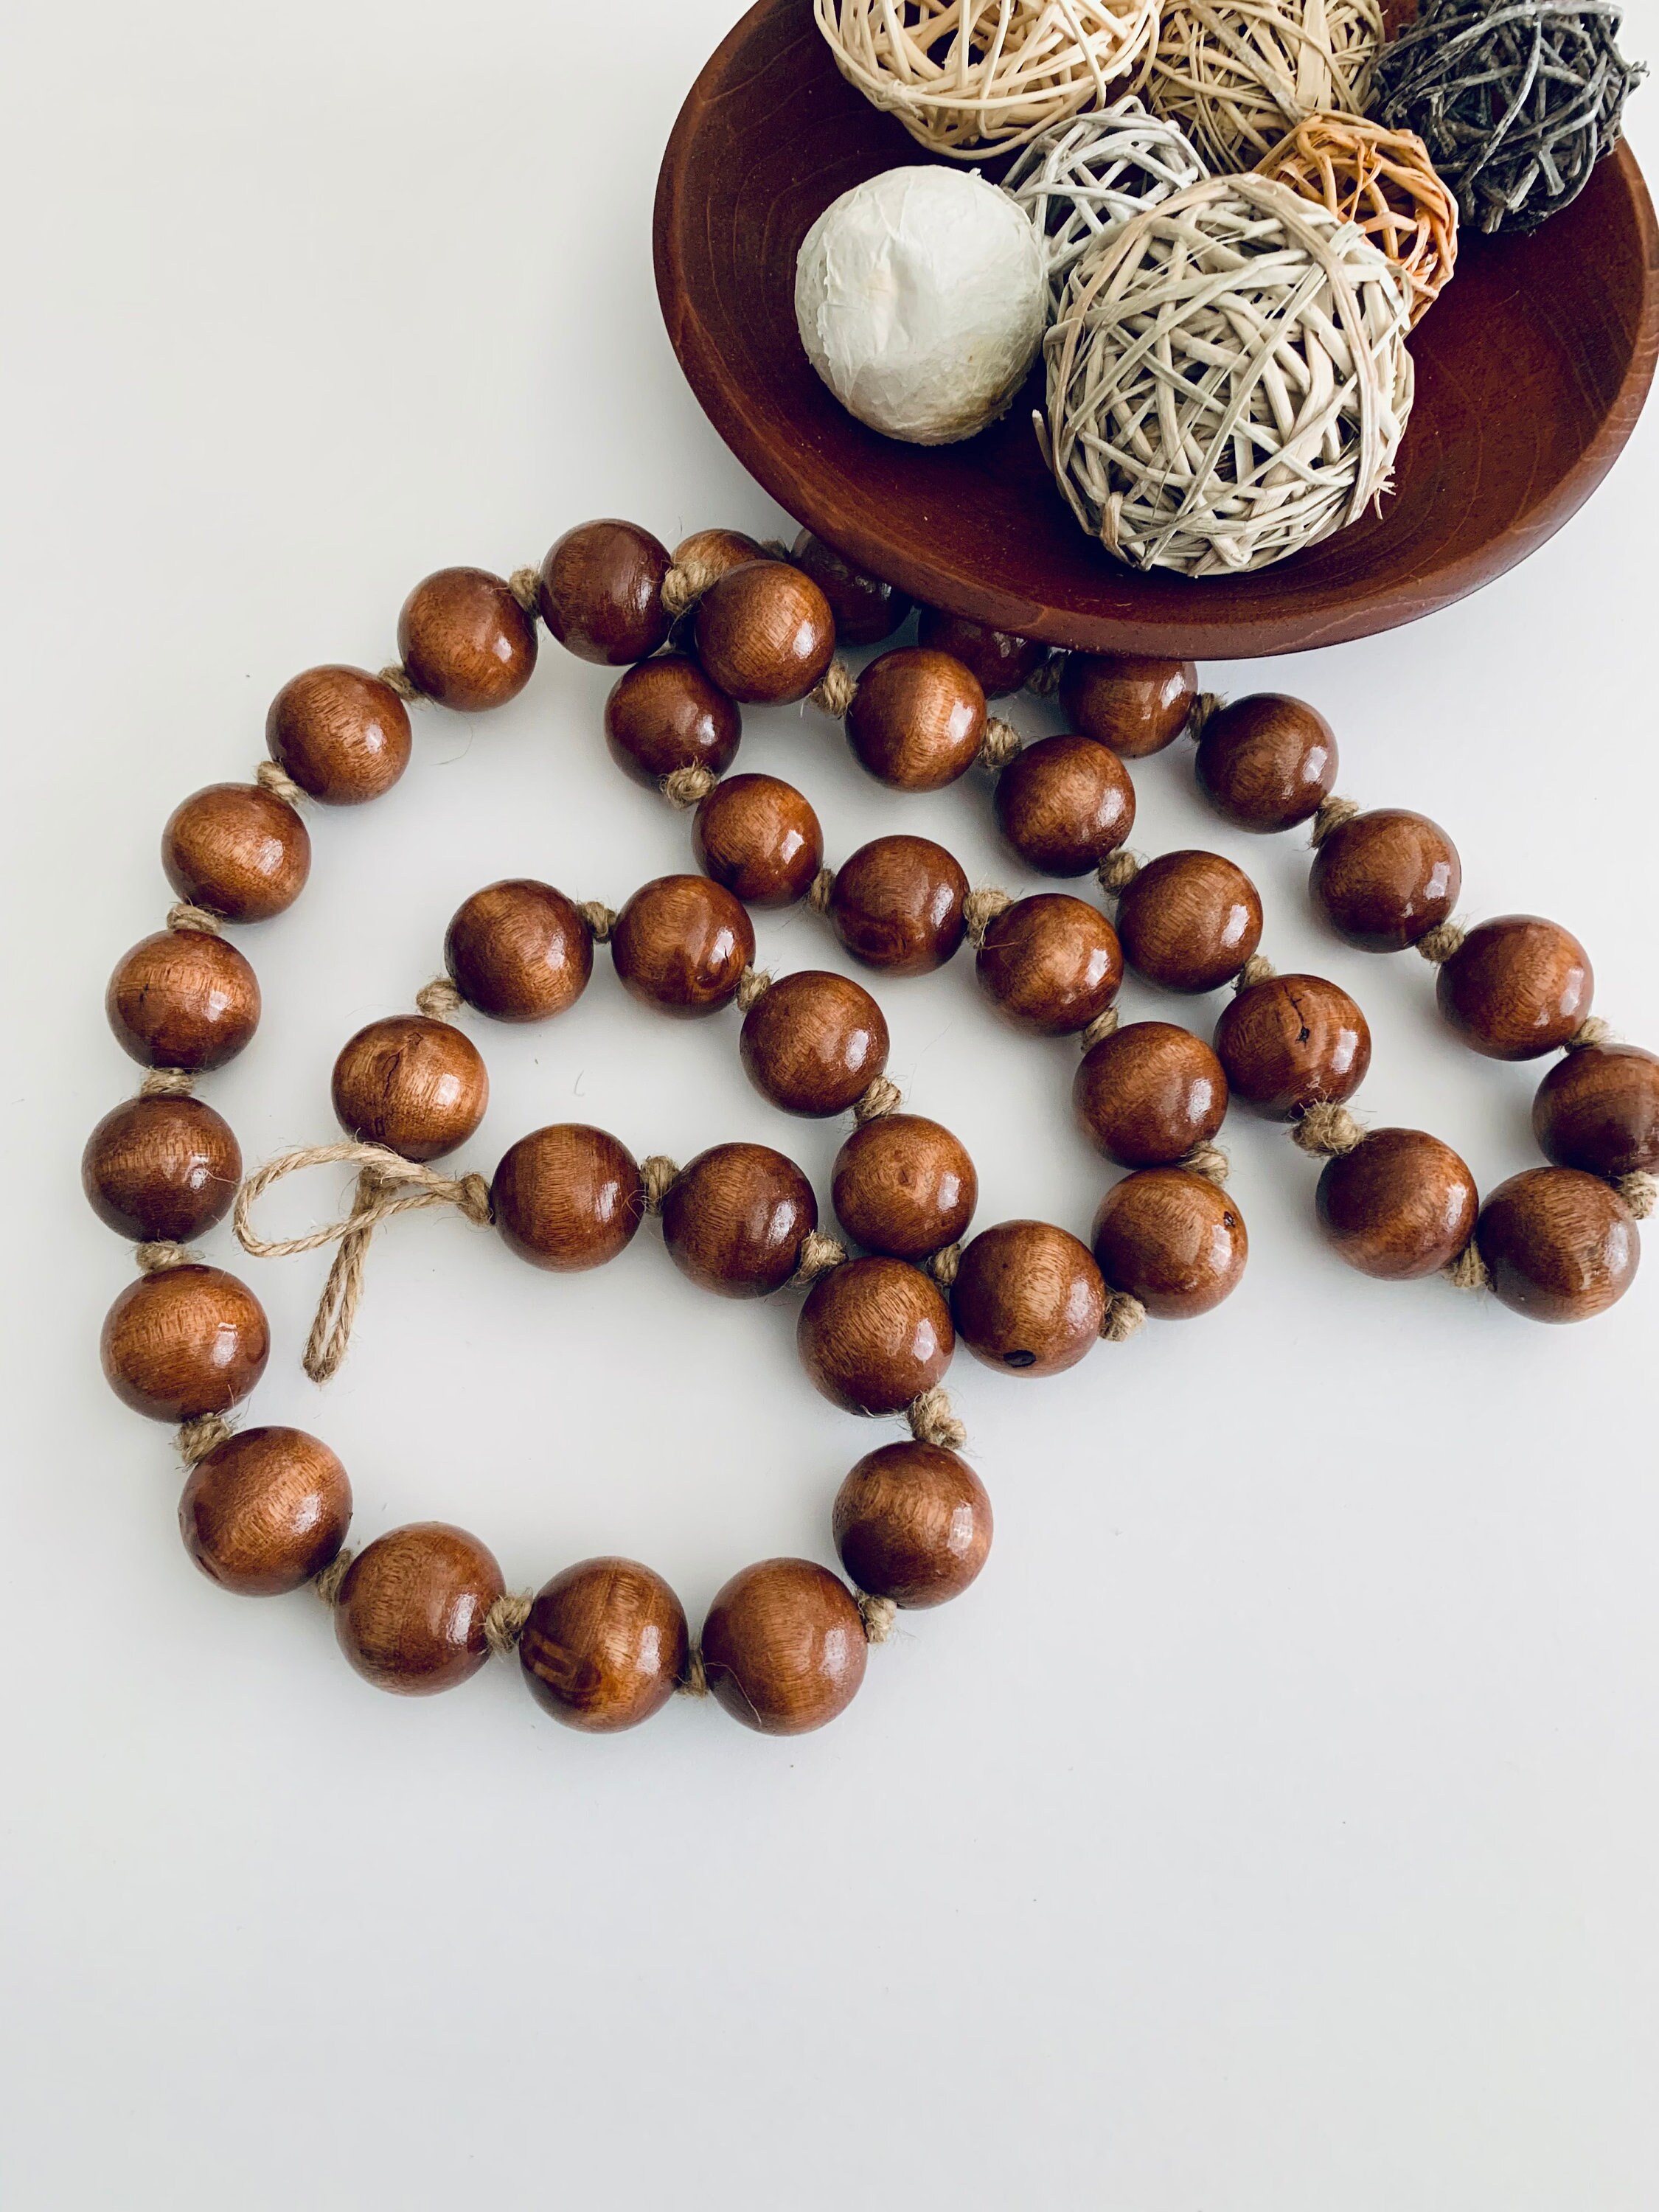 Extra Large Chunky Wood Bead Garland with 1.6 Diameter Beads, 49 Long  Wooden Farmhouse Beads, Decorative Wooden Beads for Boho, Farmhouse Decor 